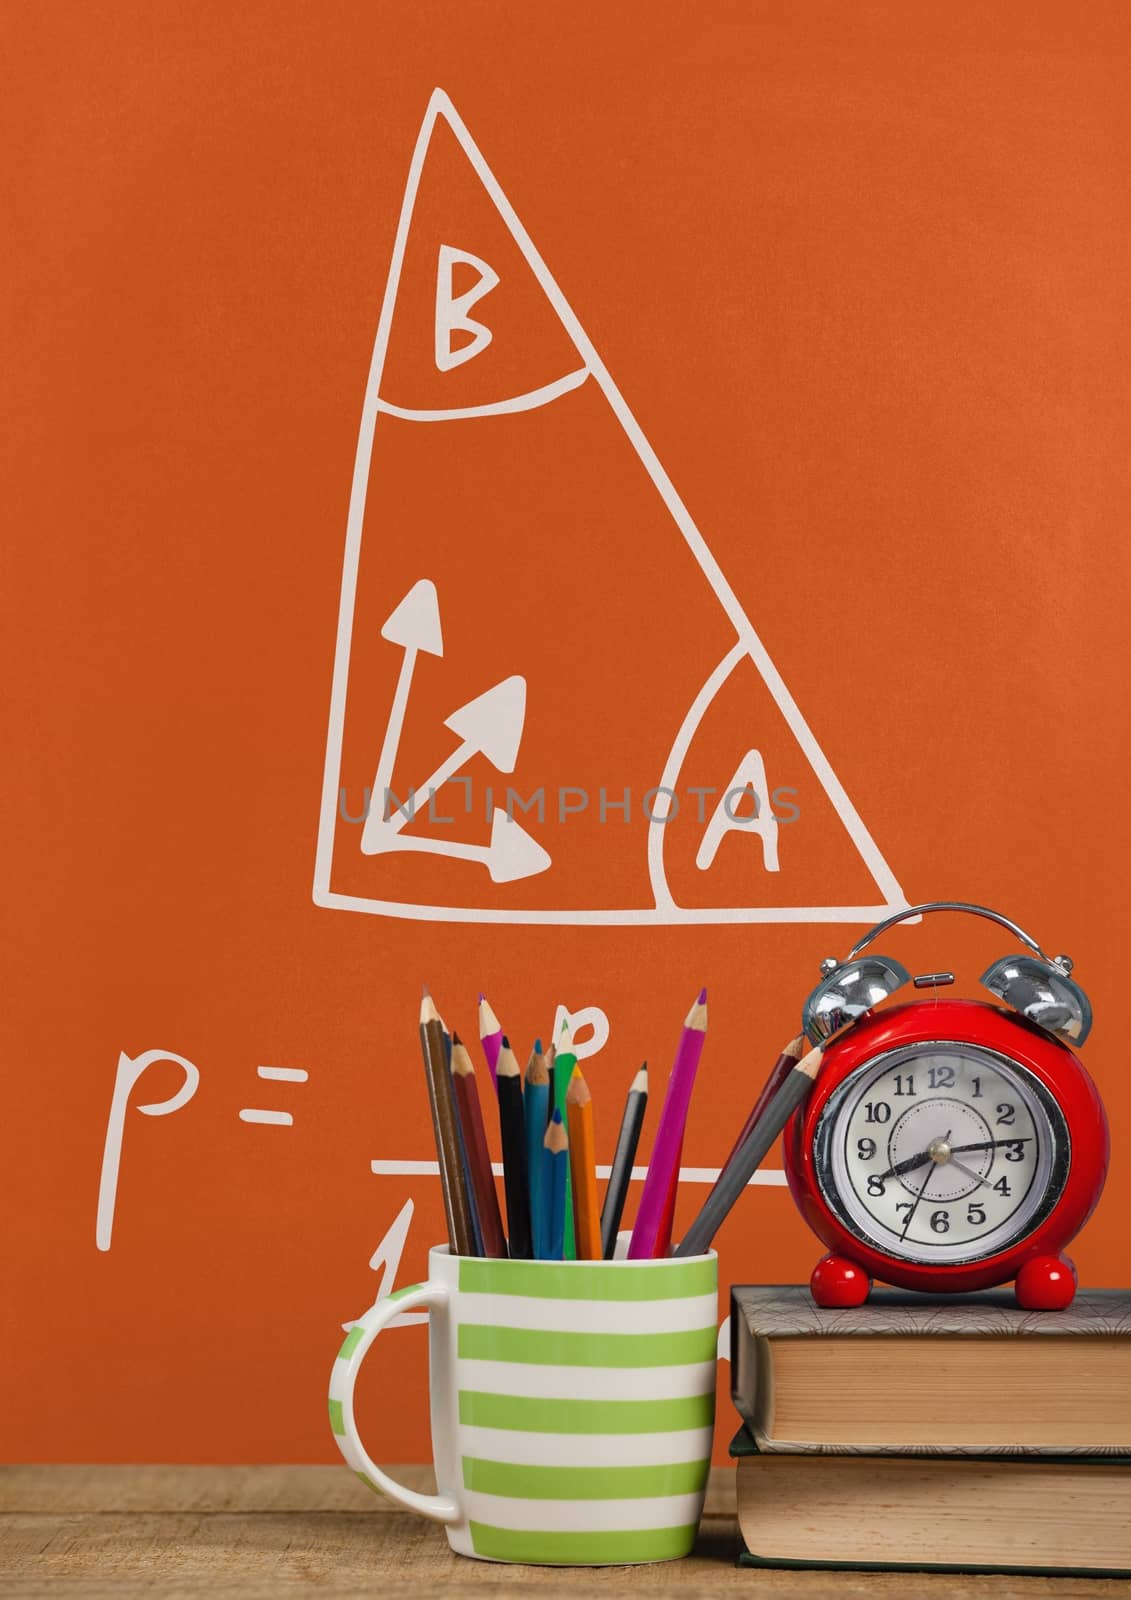 Digital composite of Books on the table against orange blackboard with education and school graphics